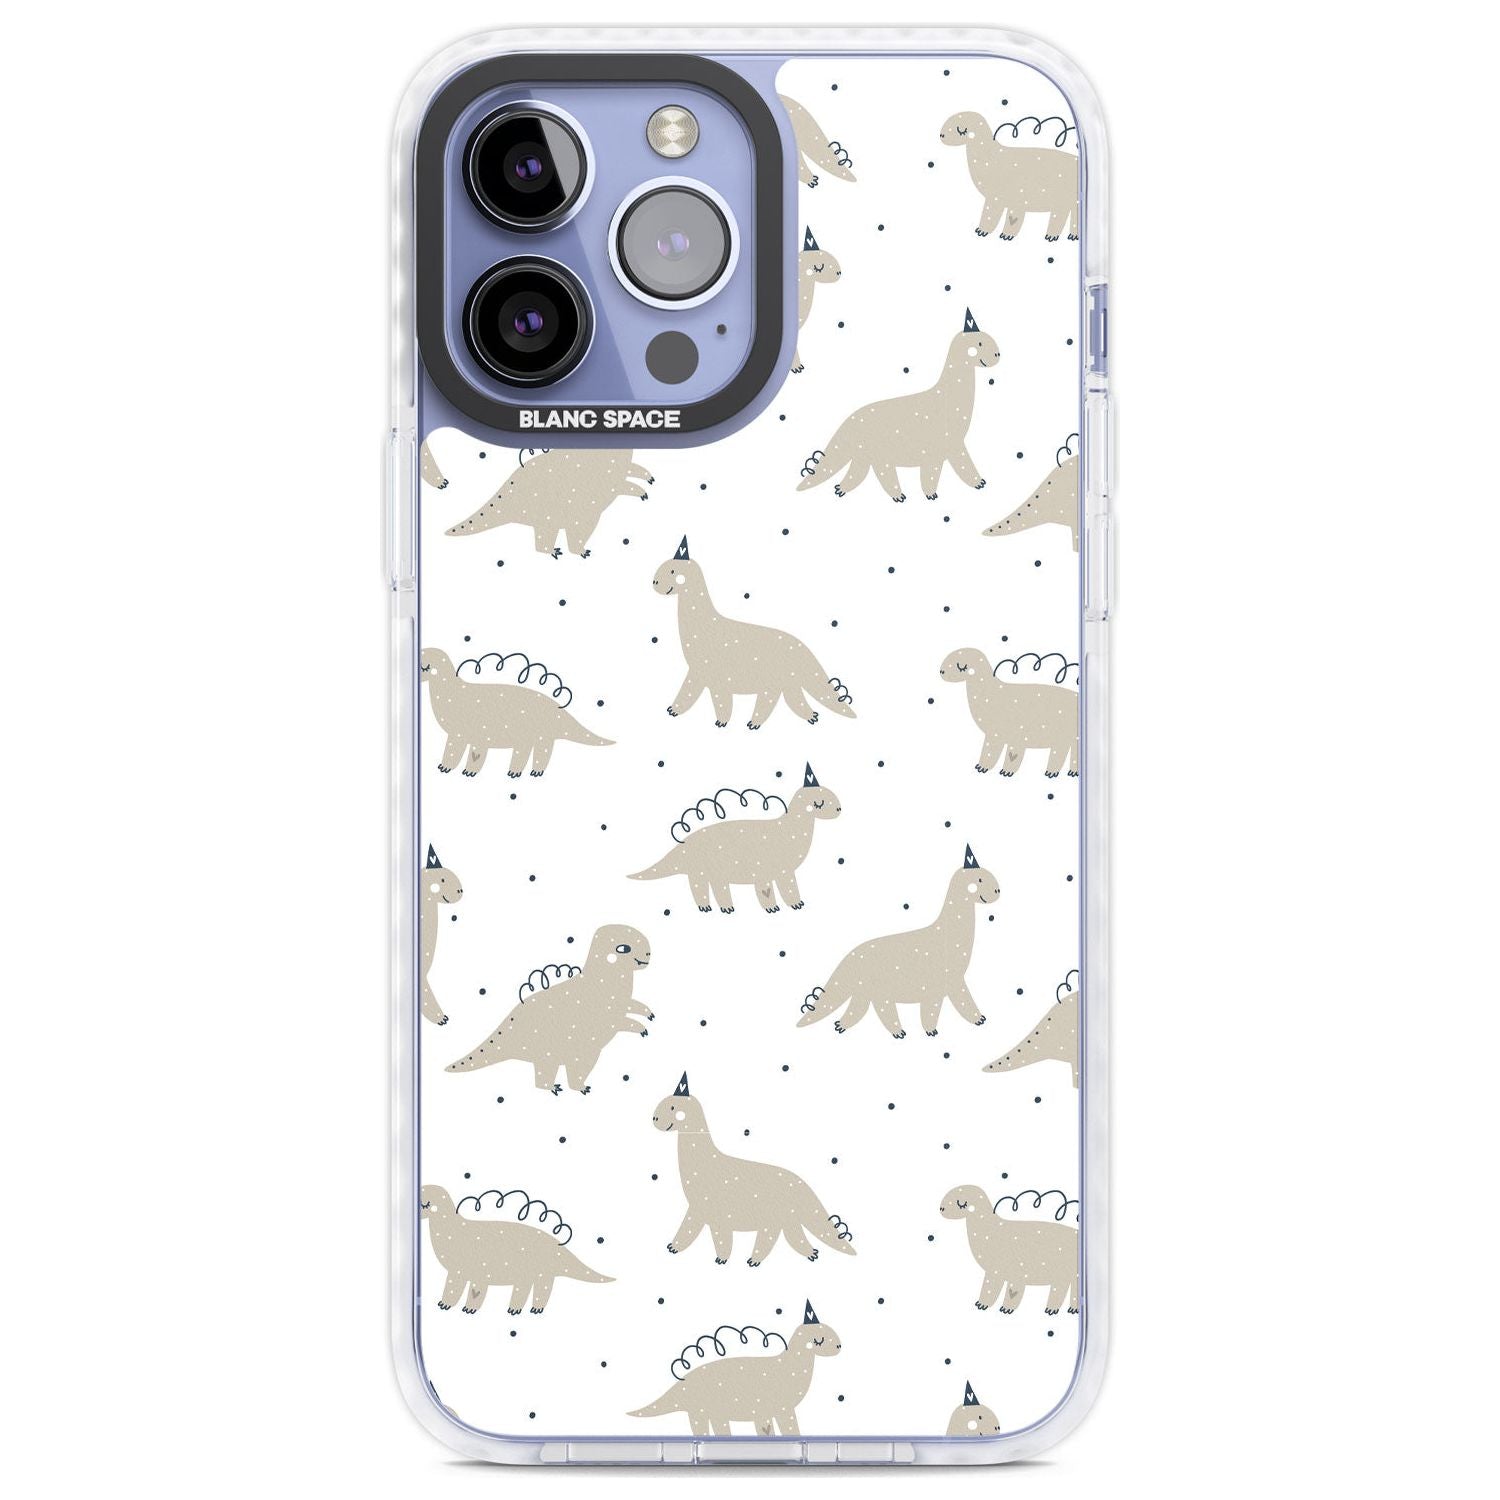 Adorable Dinosaurs Pattern Phone Case iPhone 13 Pro Max / Impact Case,iPhone 14 Pro Max / Impact Case Blanc Space